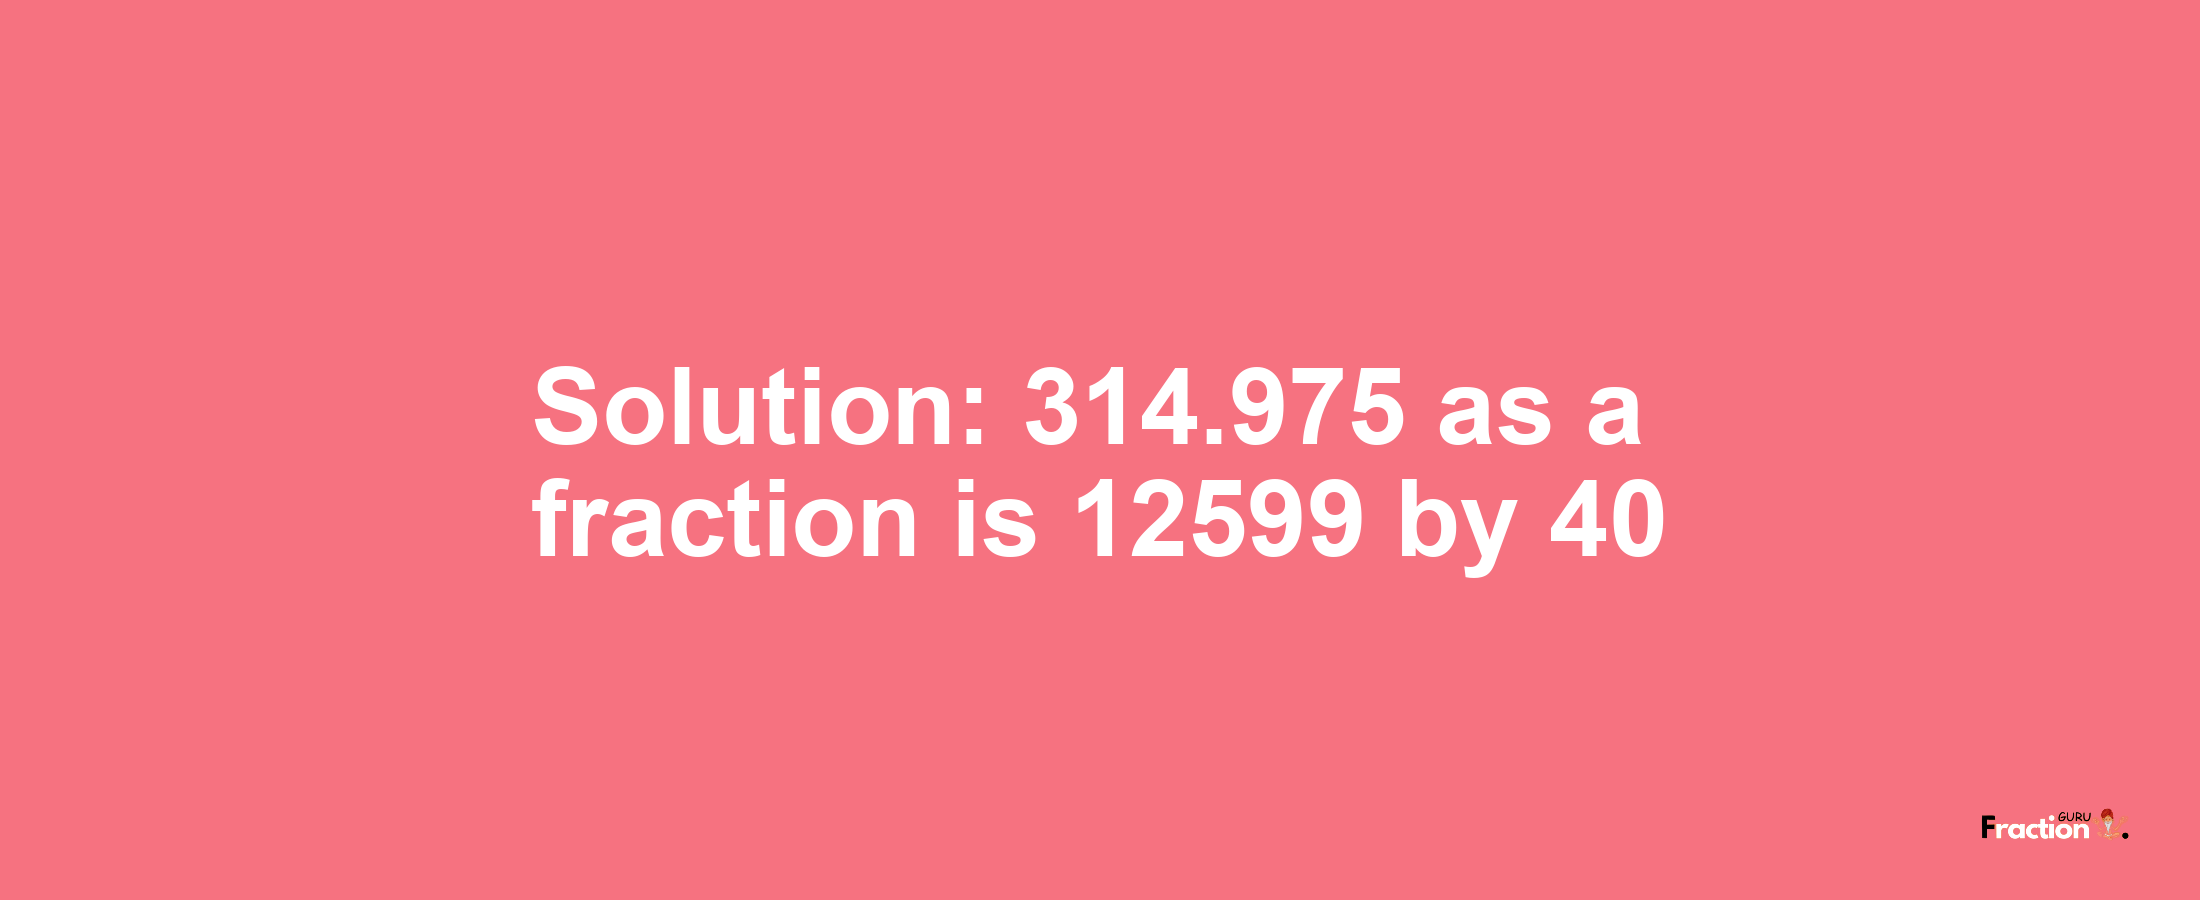 Solution:314.975 as a fraction is 12599/40